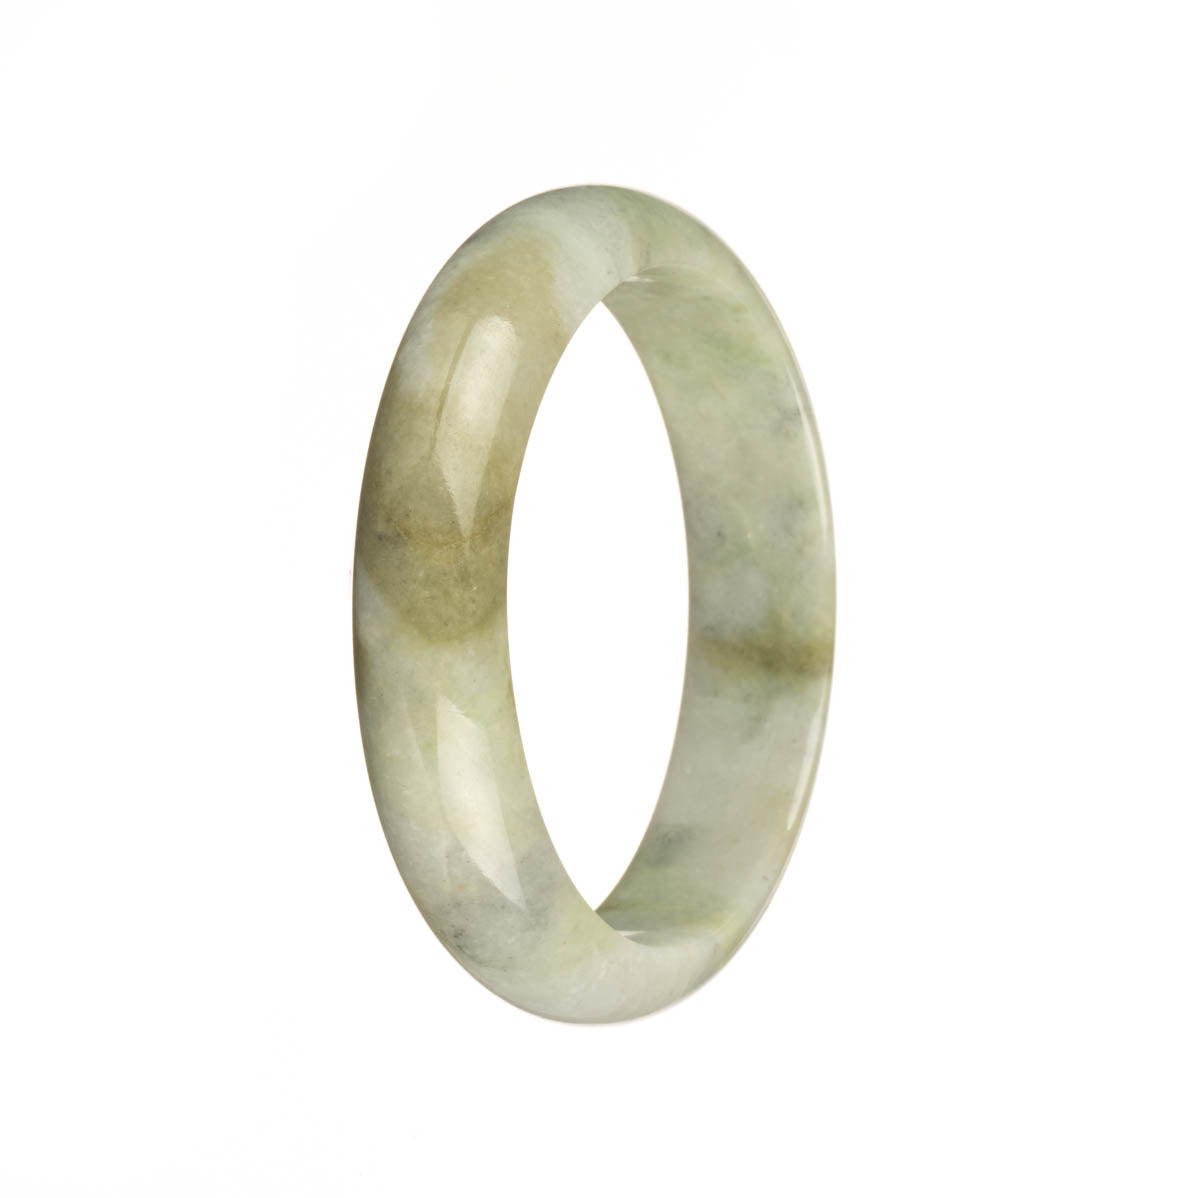 A close-up image of a genuine grade A pale green jade bangle bracelet with olive green patterns. The bracelet is in the shape of a half moon and measures 54mm in diameter. Created by MAYS GEMS.